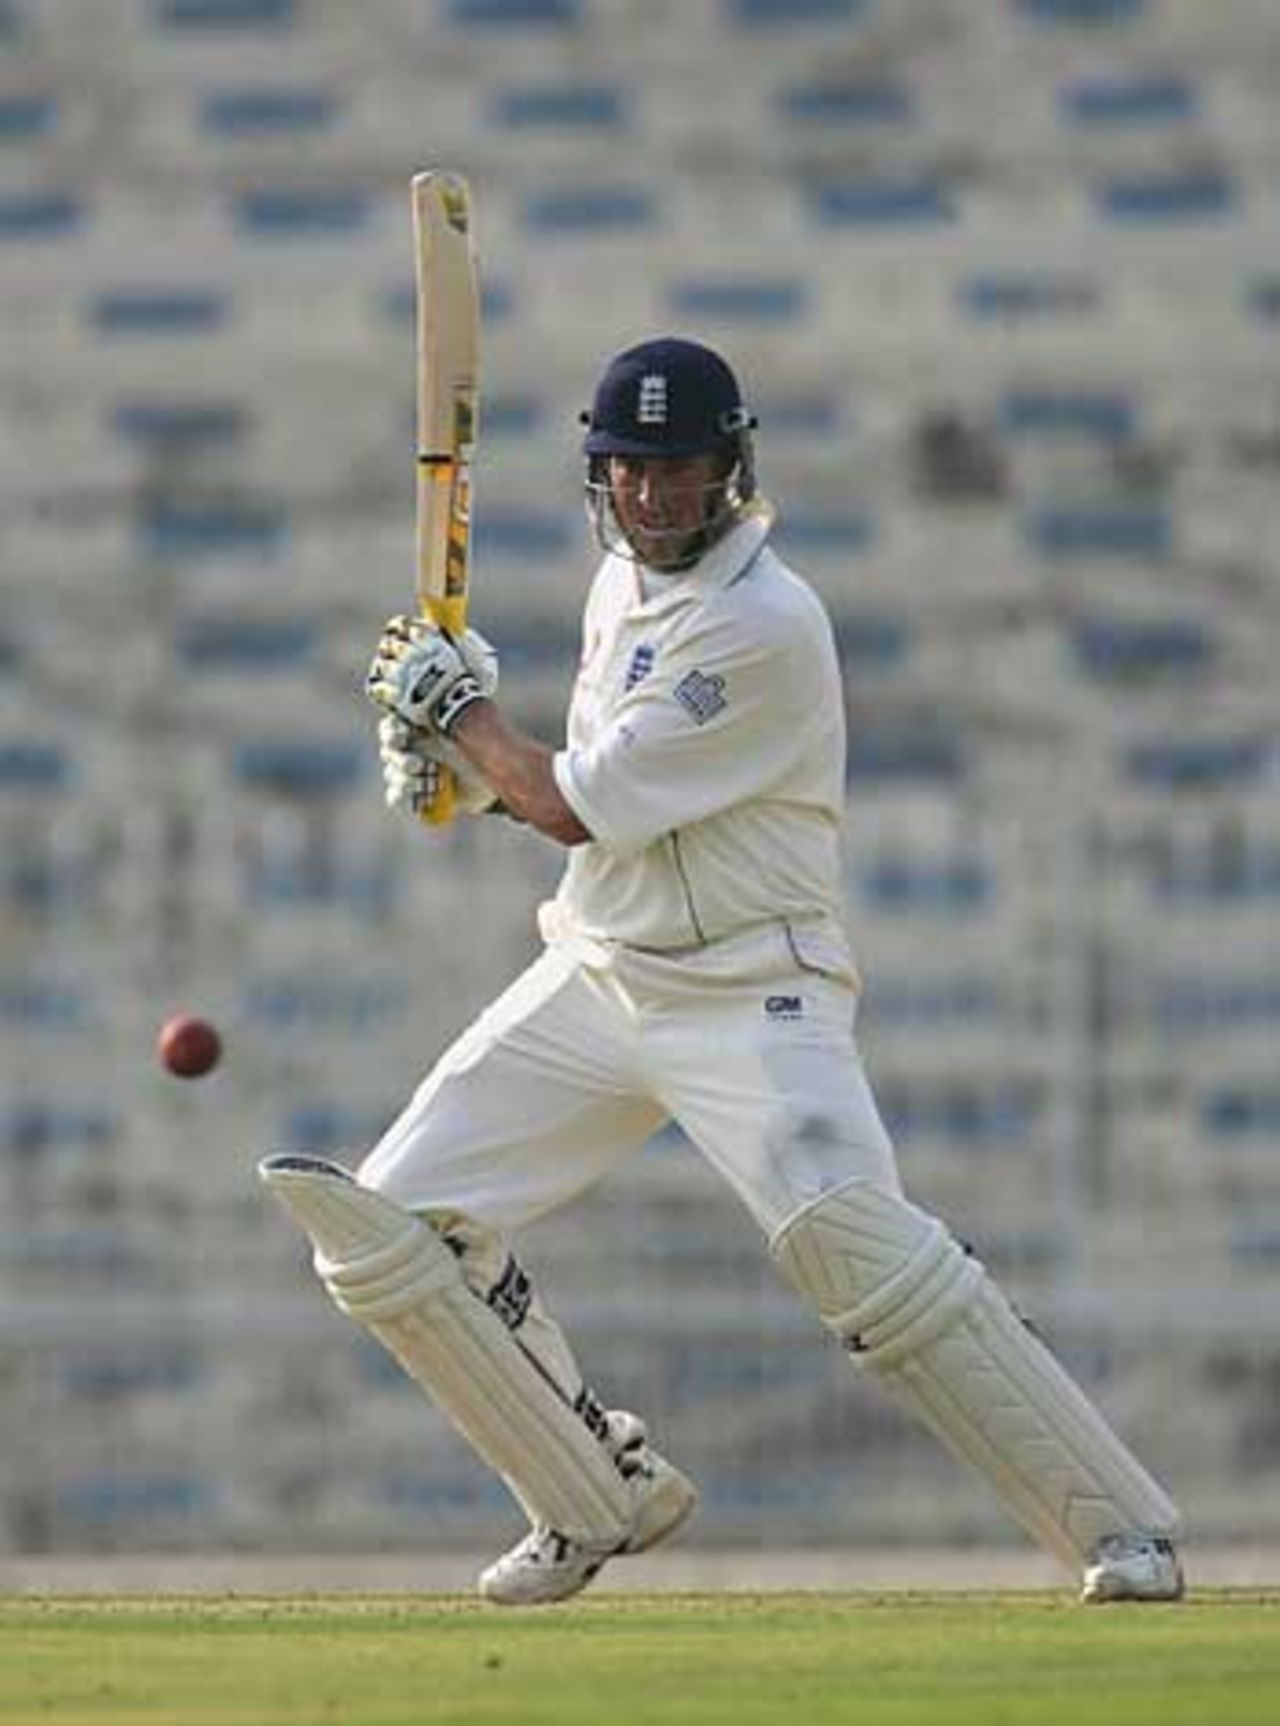 Marcus Trescothick showed impressive early form in Pakistan as he rescued England from an early batting collapse, Patron's XI v England XI, Rawalpindi, Tour Match, 1st day, October 31, 2005